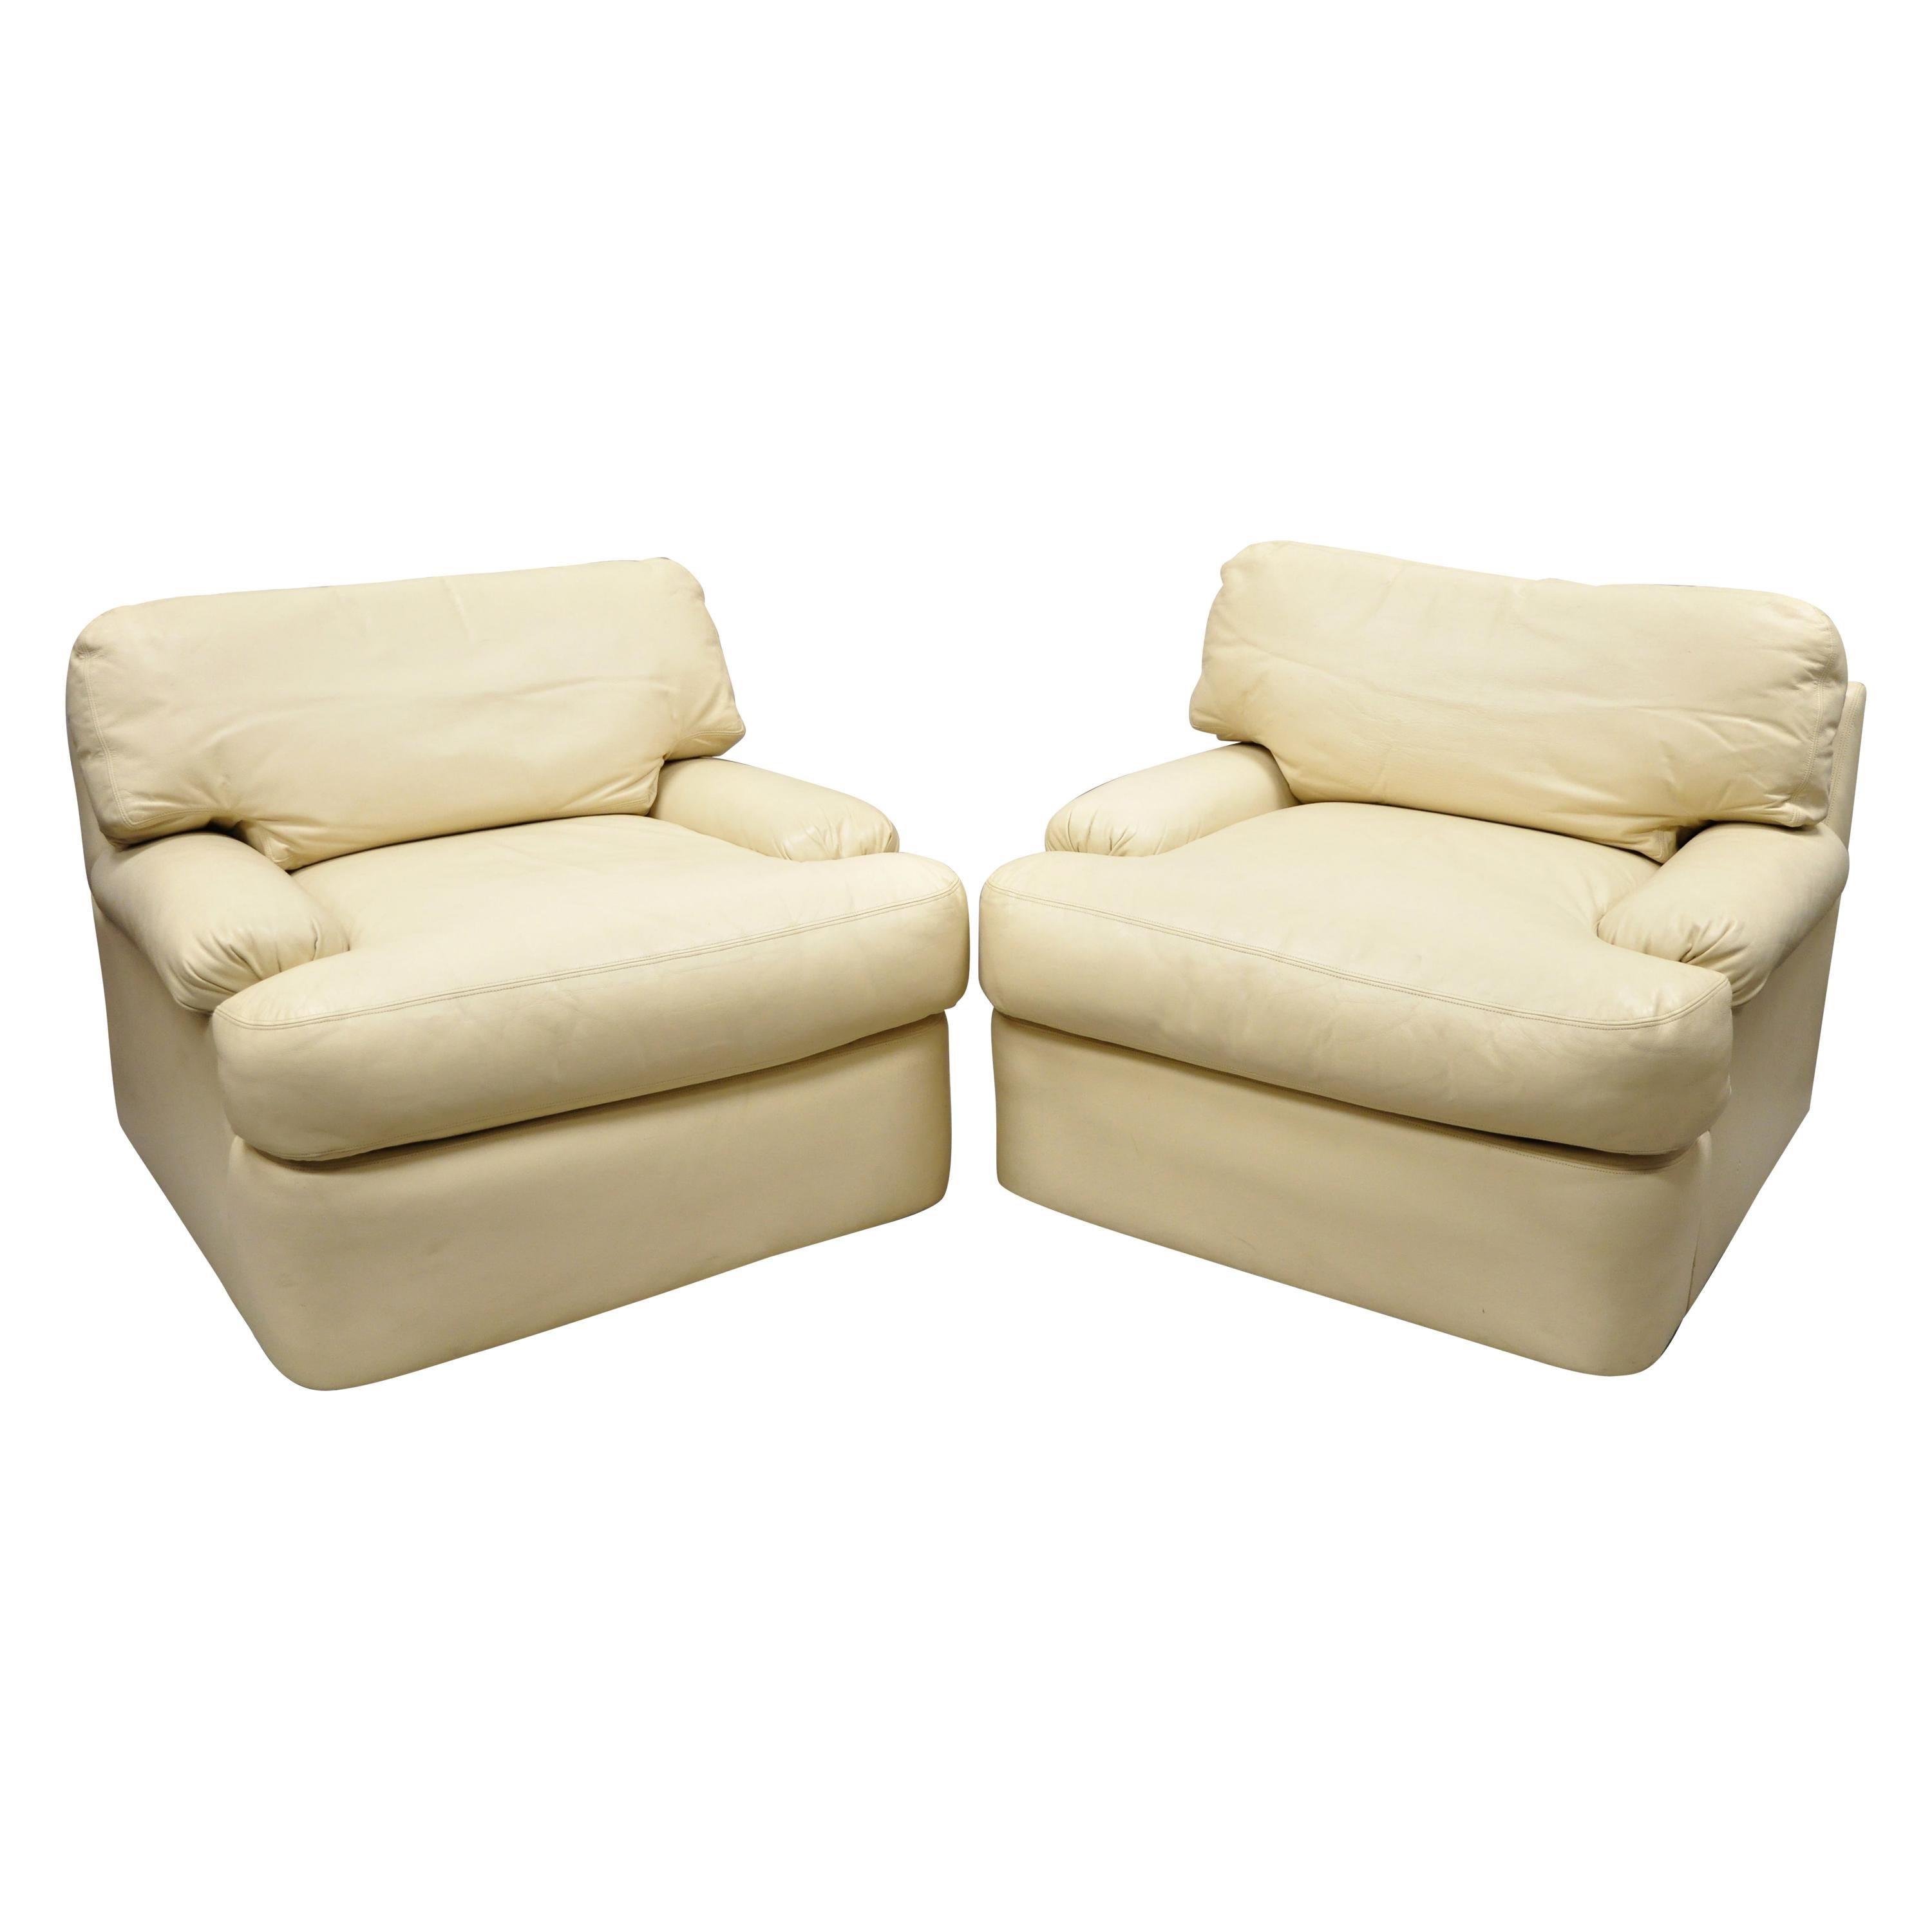 Directional Milo Baughman Swivel Beige Leather Club Lounge Armchairs, a Pair